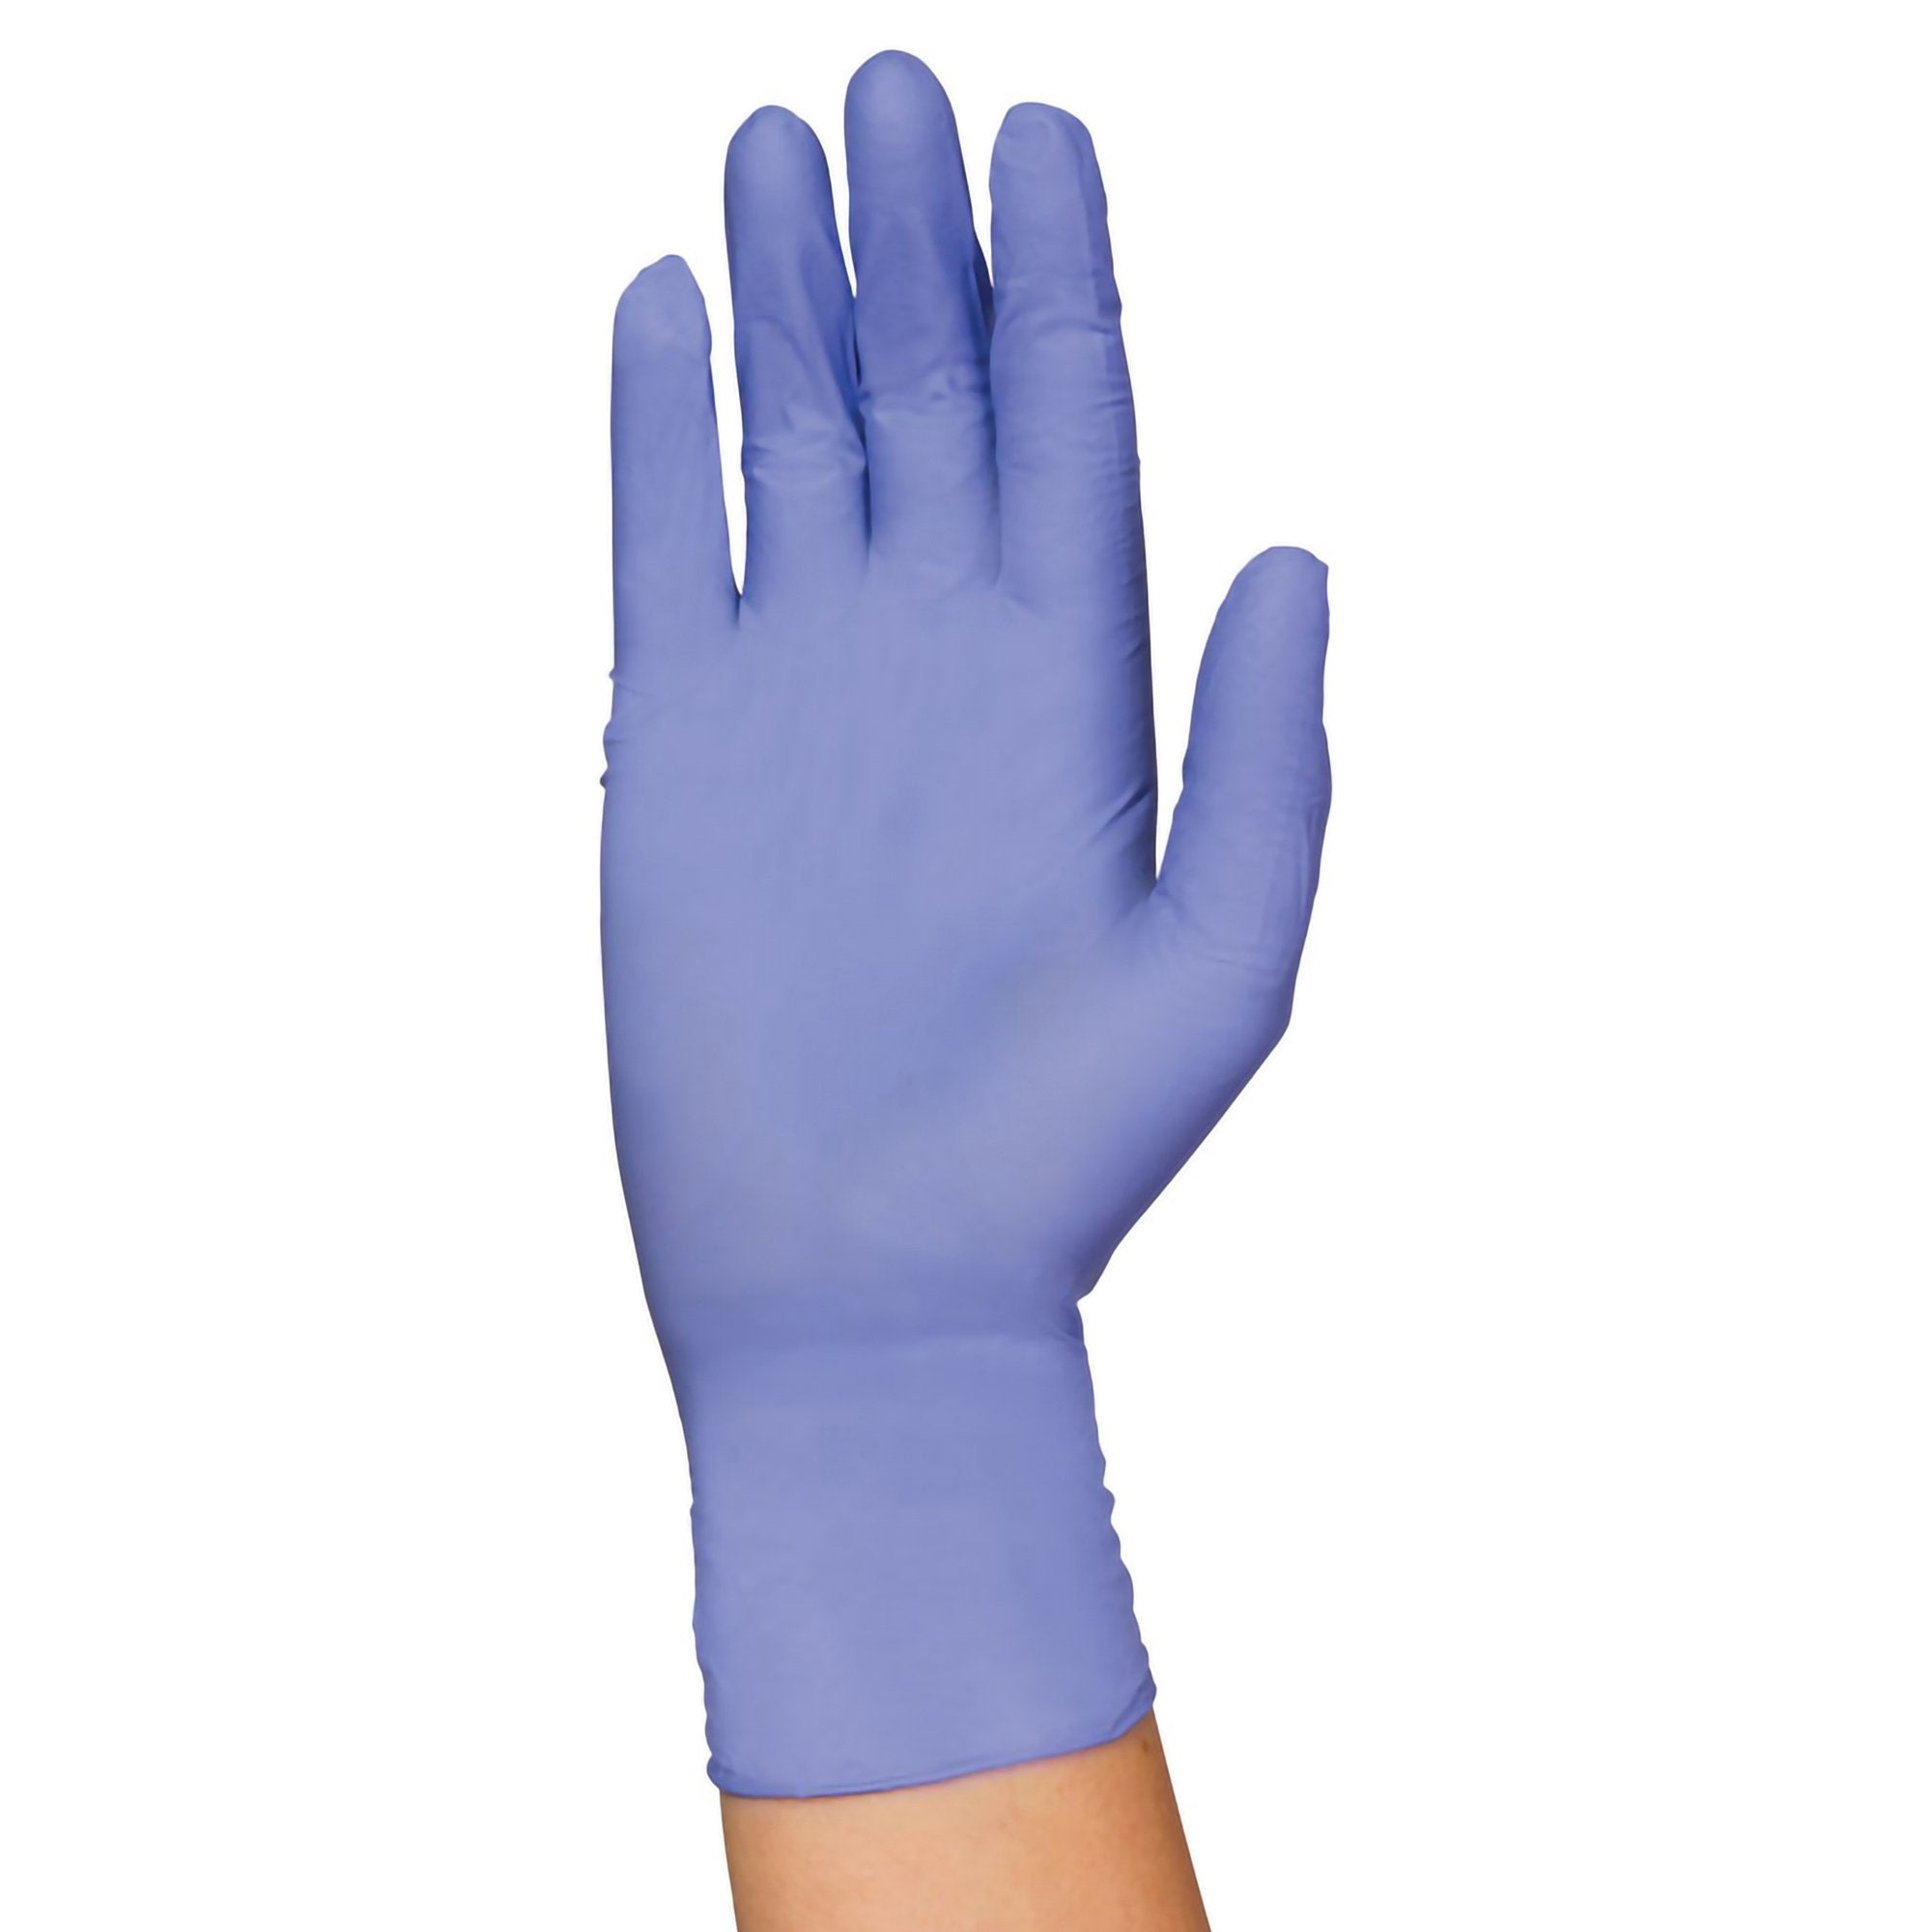 Exam Glove PremierPro™ Plus Small NonSterile Nitrile Standard Cuff Length Textured Fingertips Blue Chemo Tested